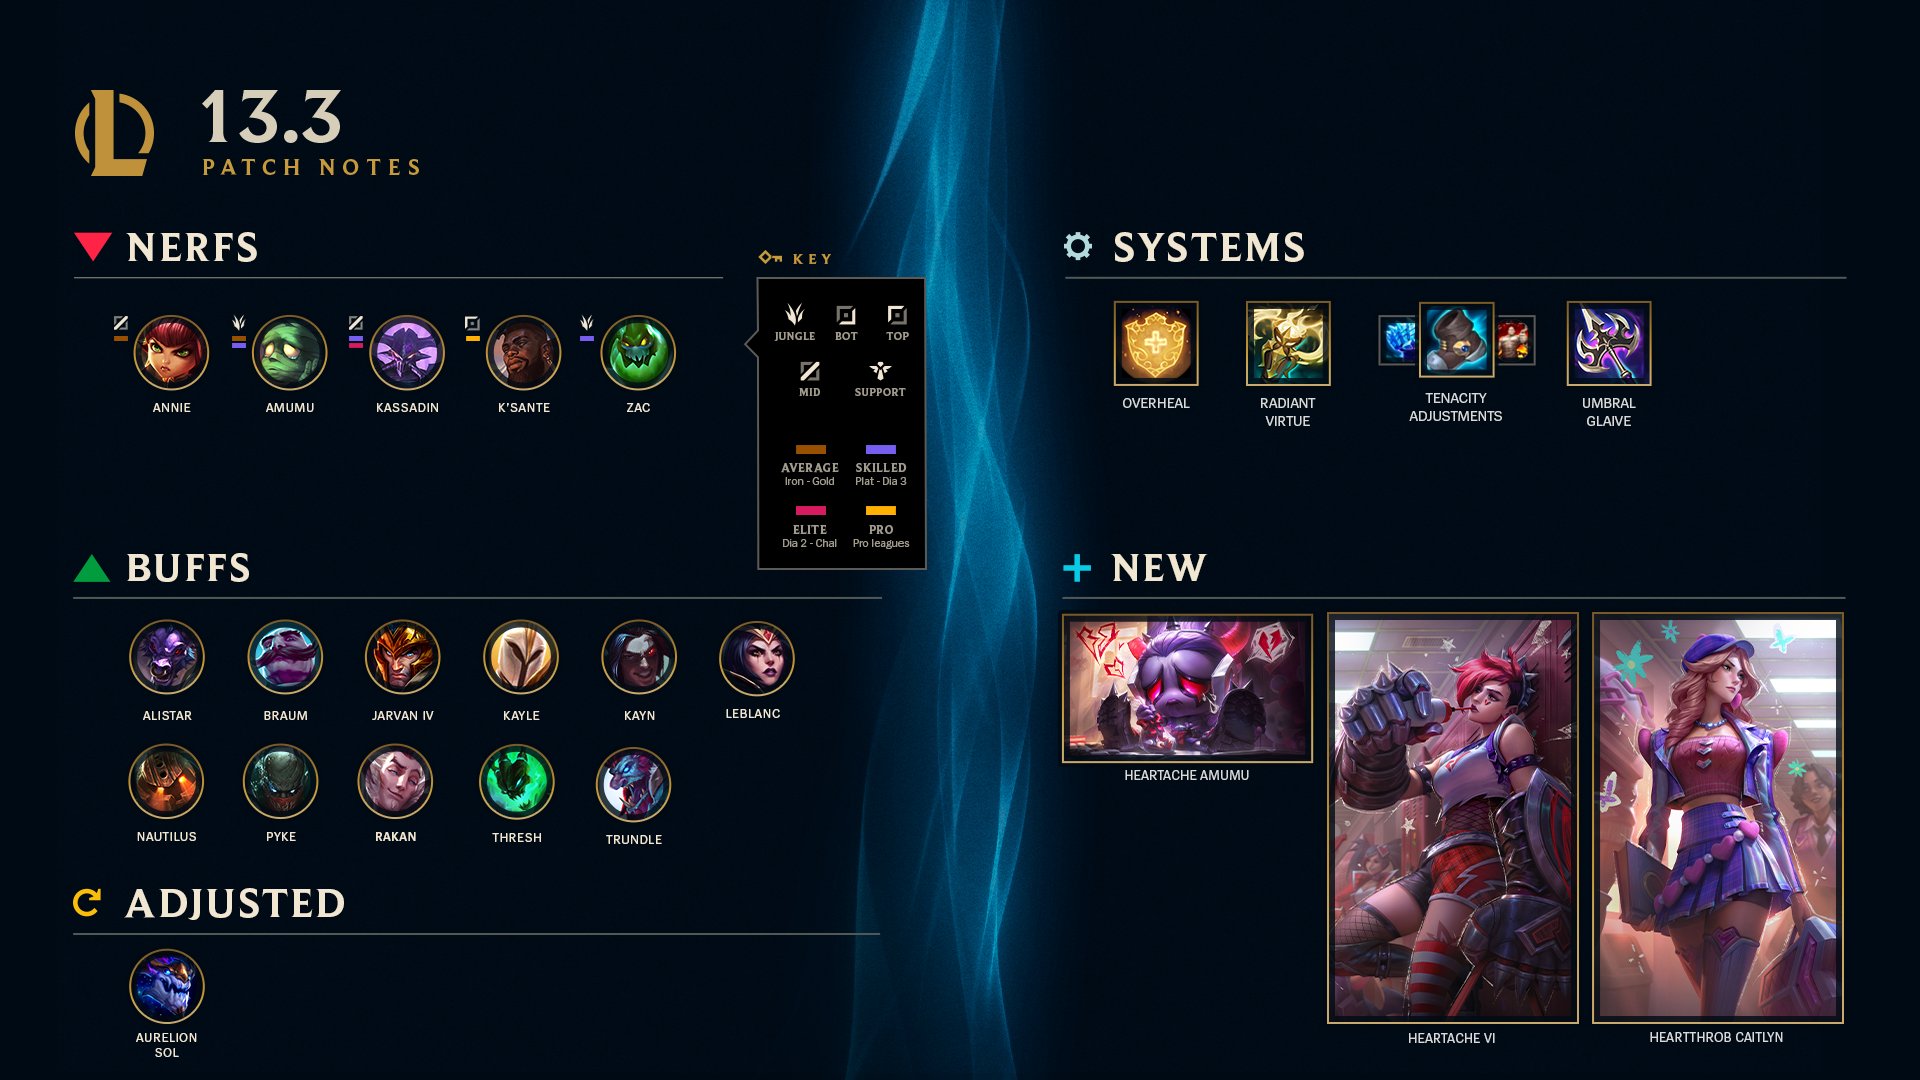 Champion Pricing Update - League of Legends